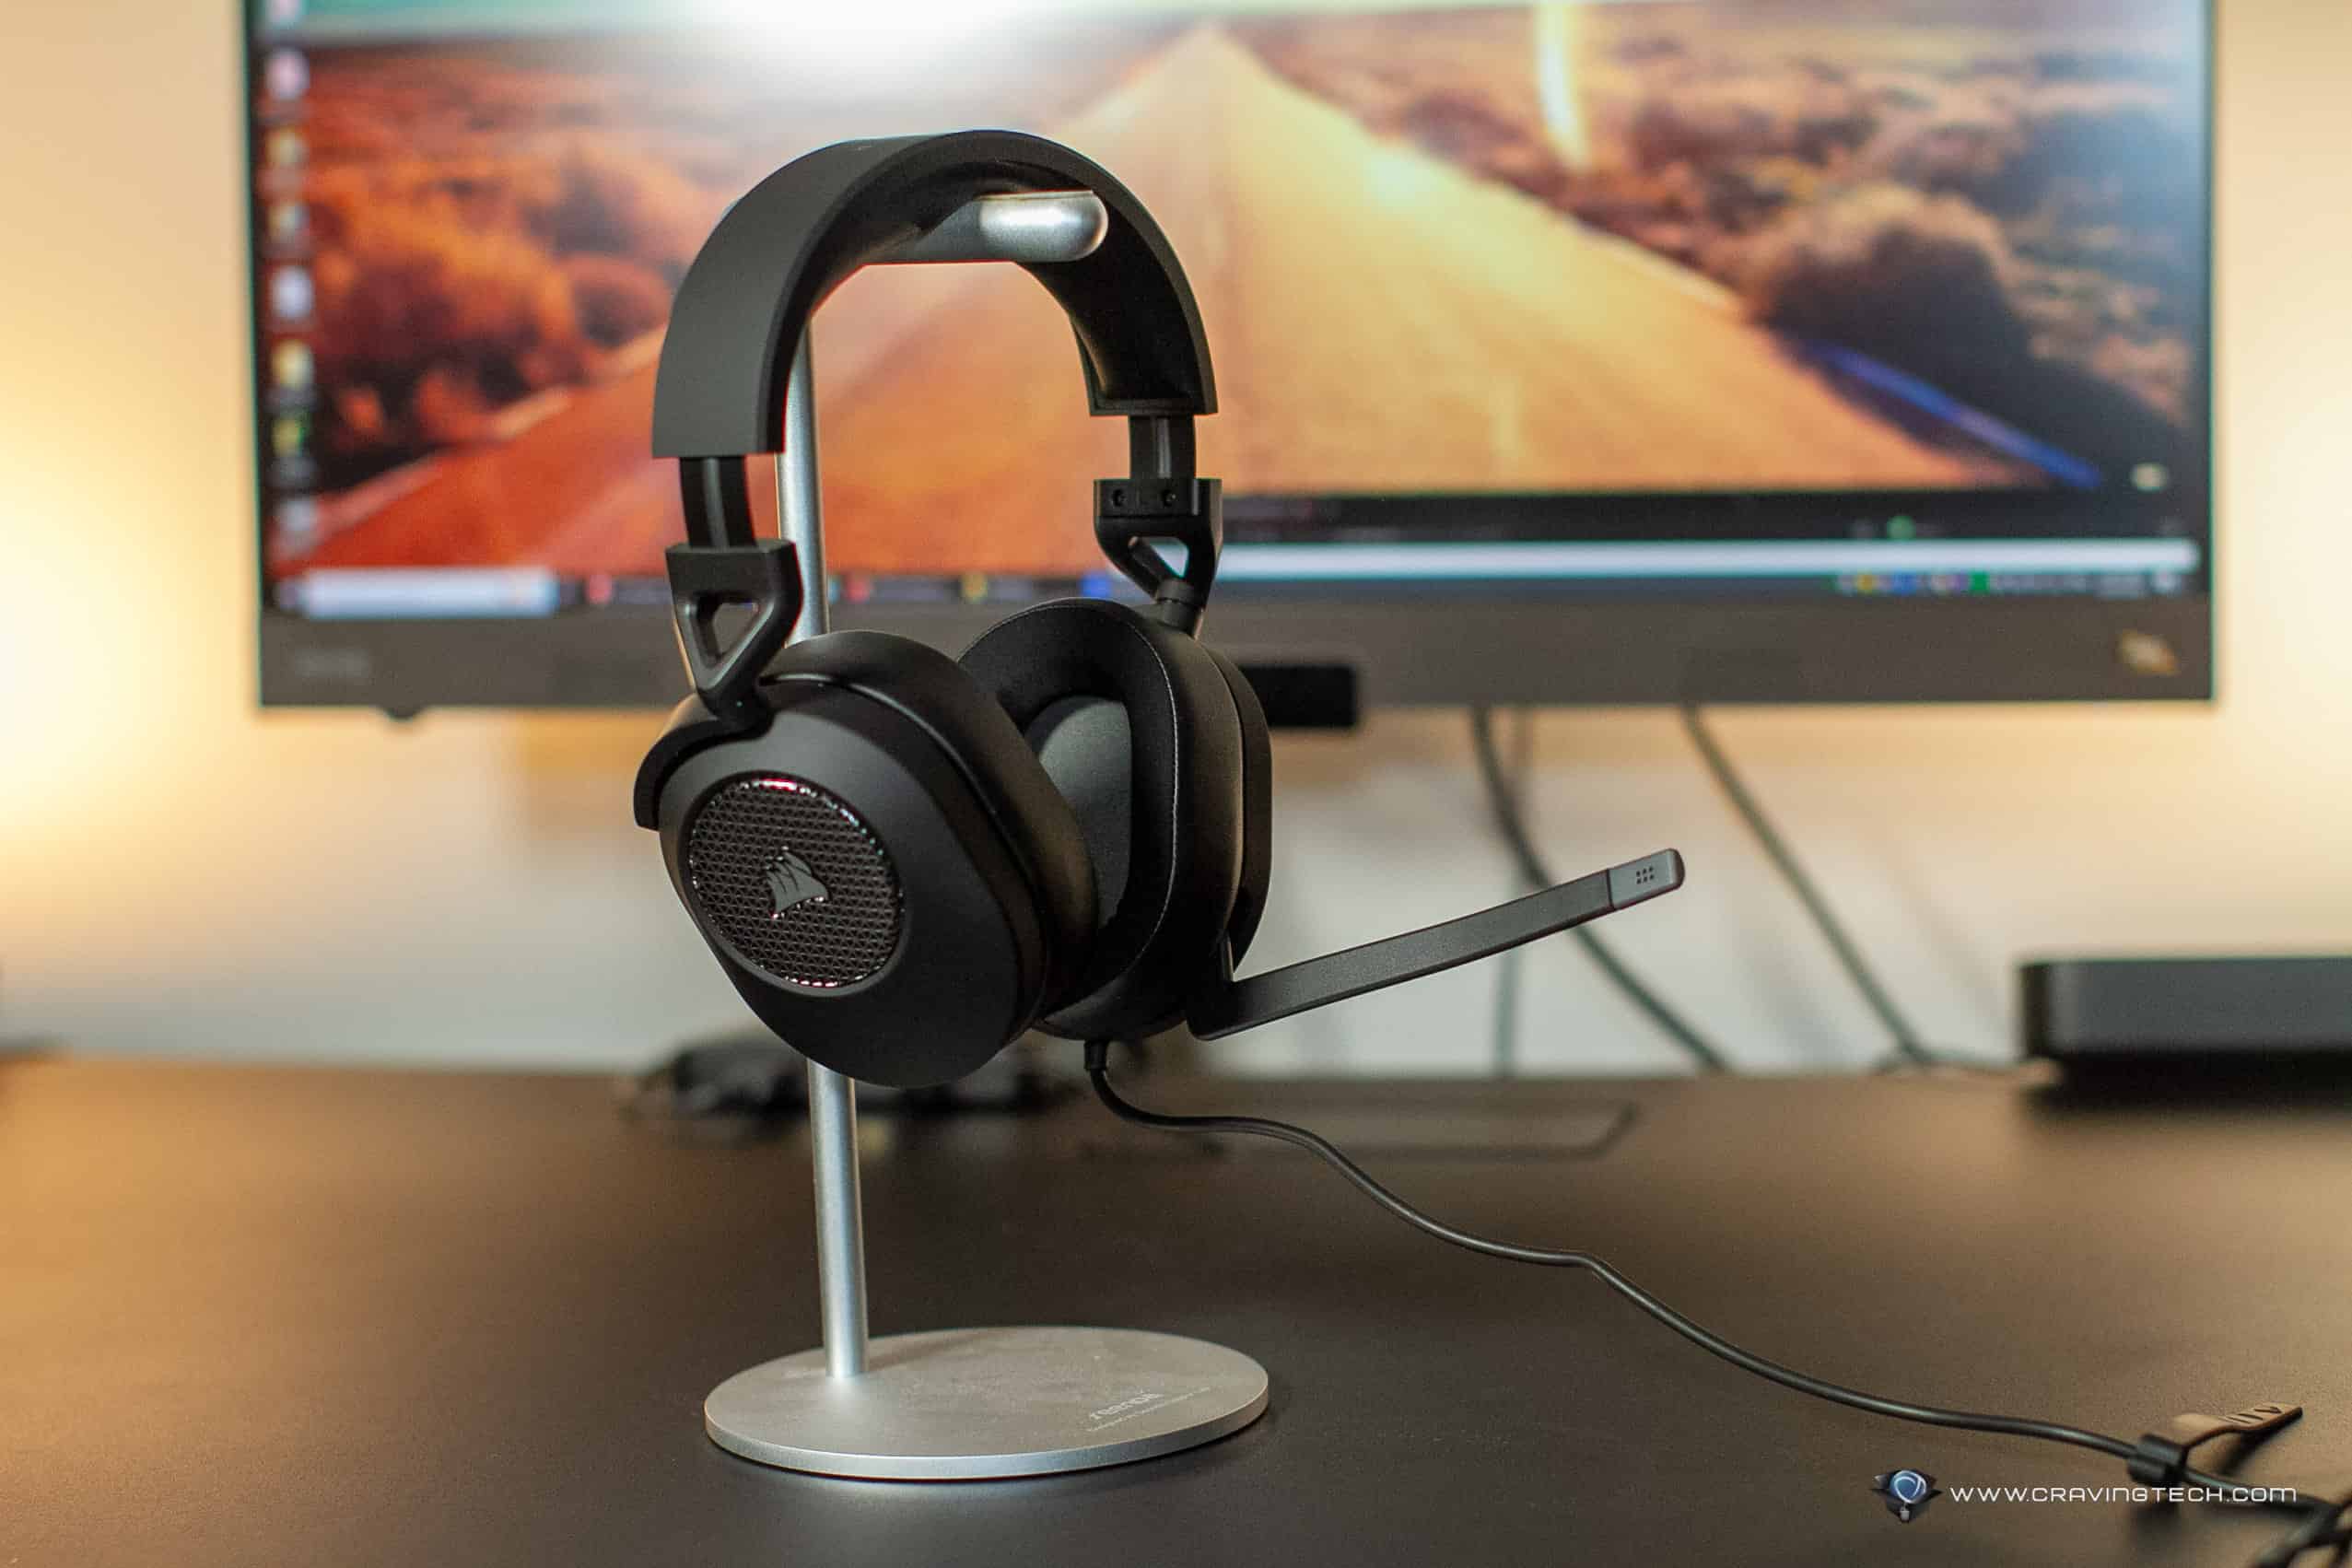 This headset can personalise your gaming audio – CORSAIR HS65 SURROUND Review